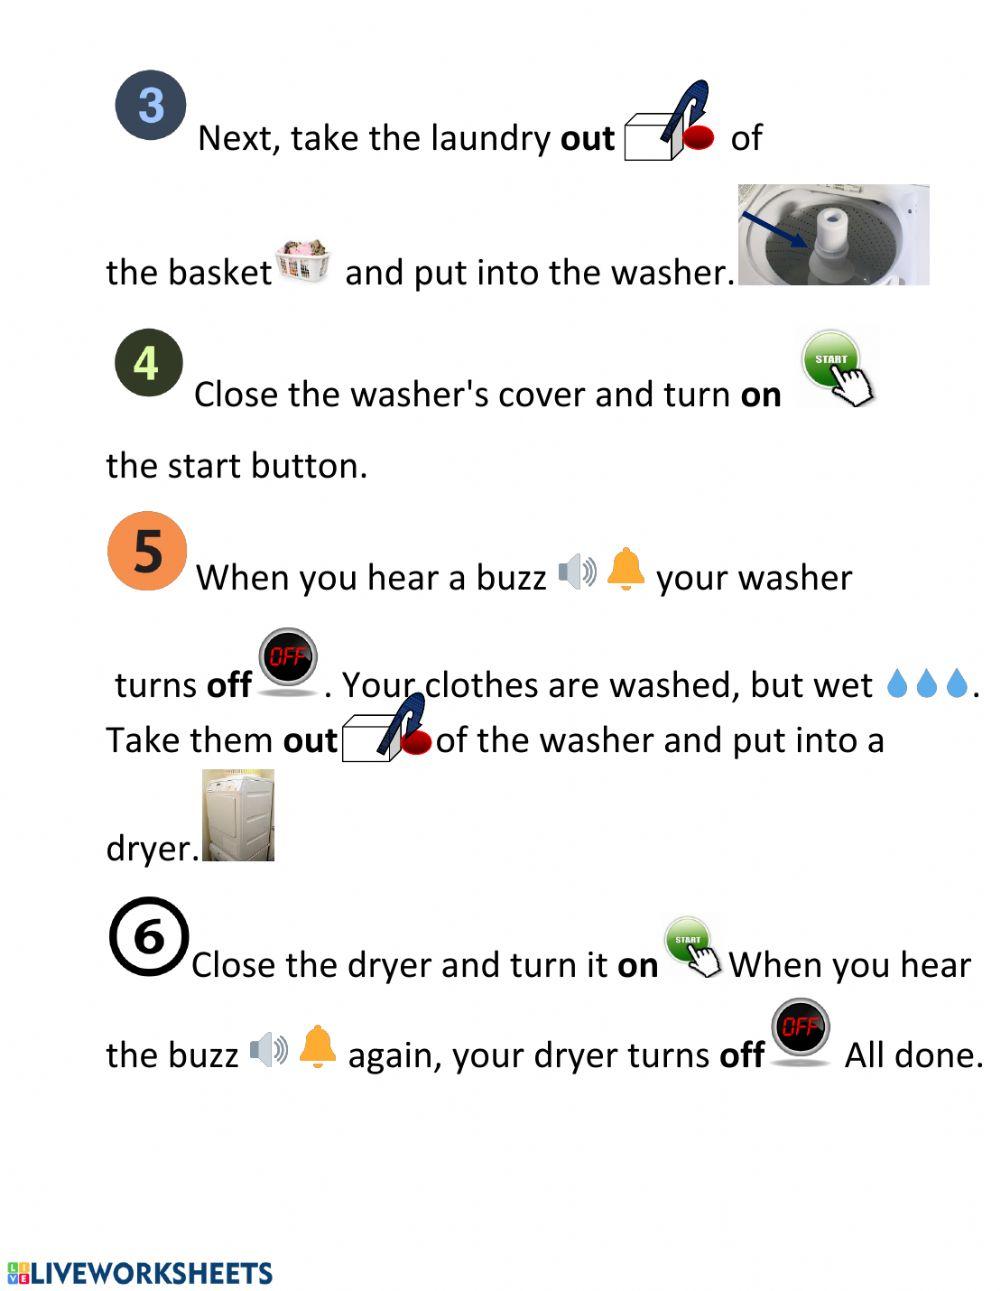 How to make a laundry?